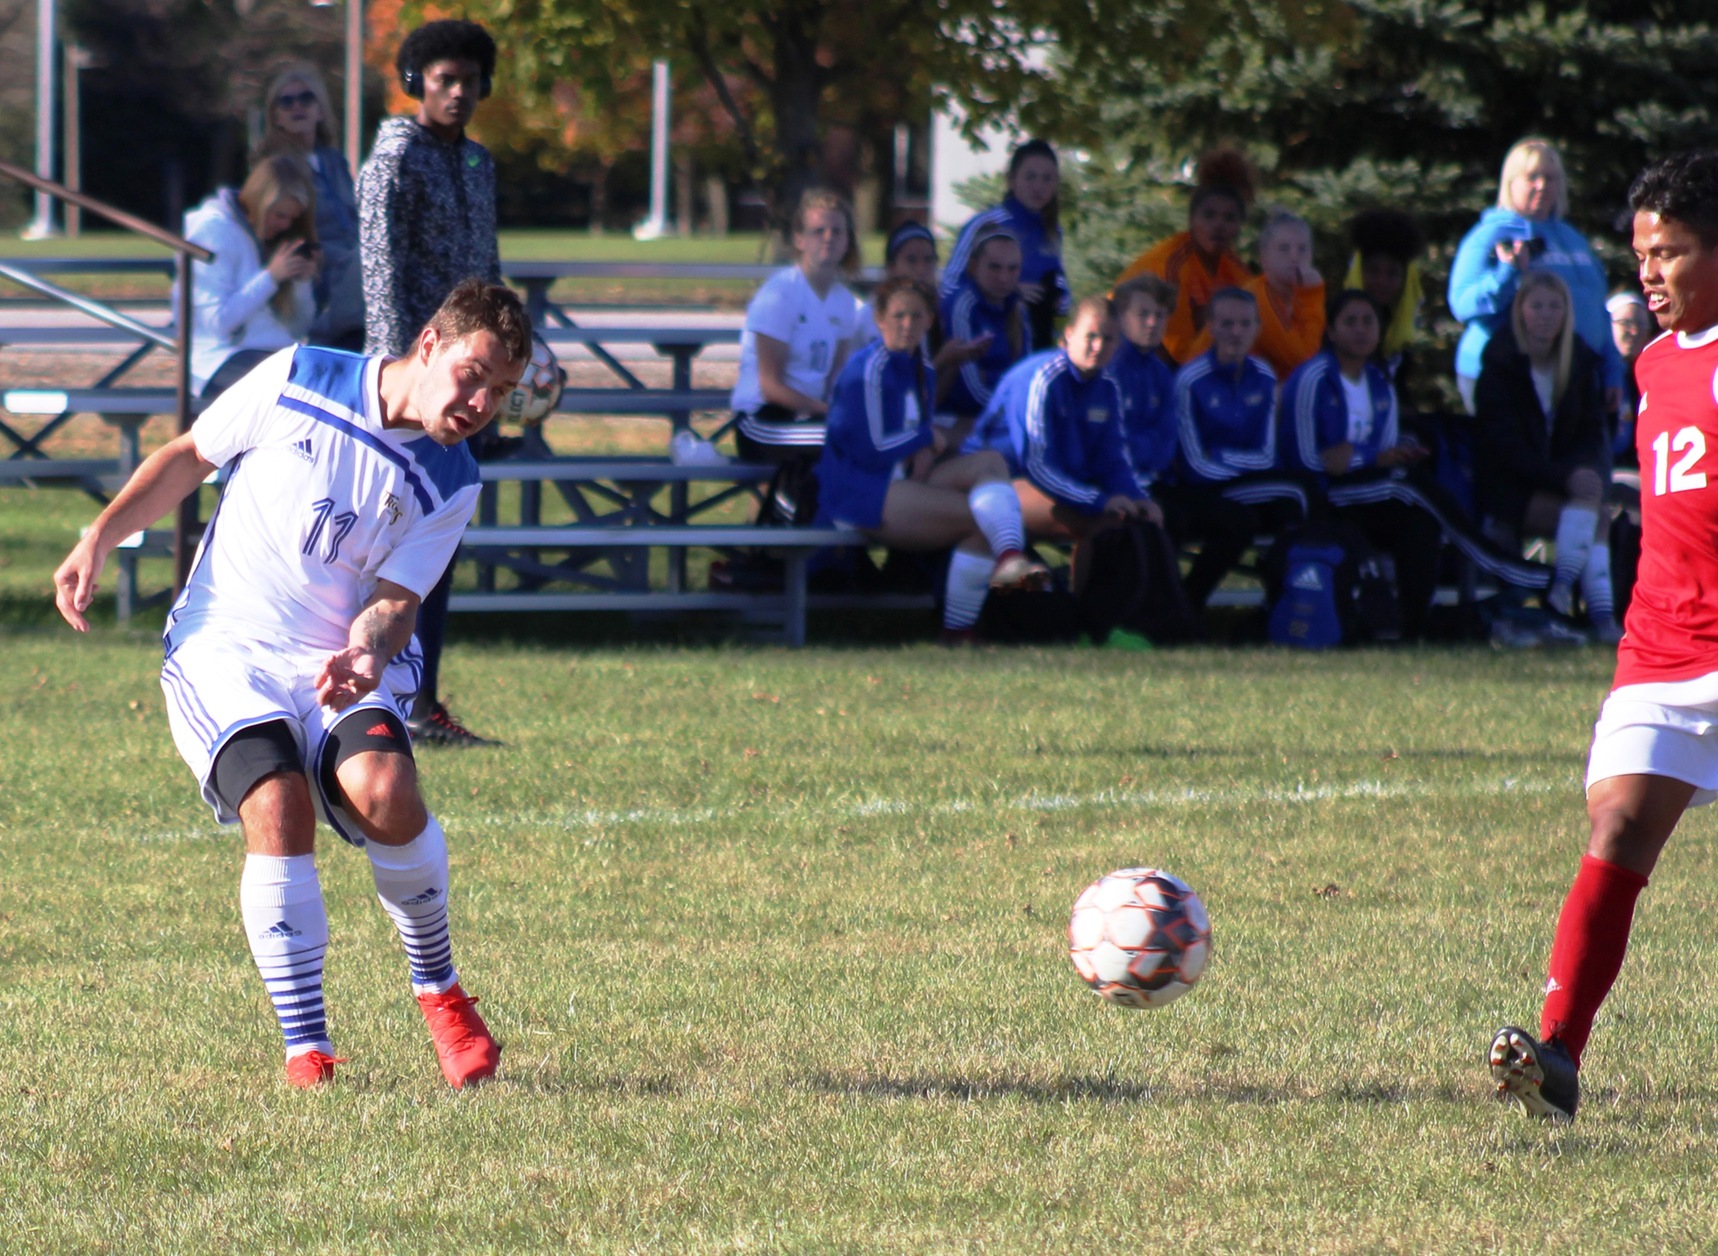 NIACC's Aleksander Trujic was selected as the ICCAC player of the week for the week of Oct. 14-20.